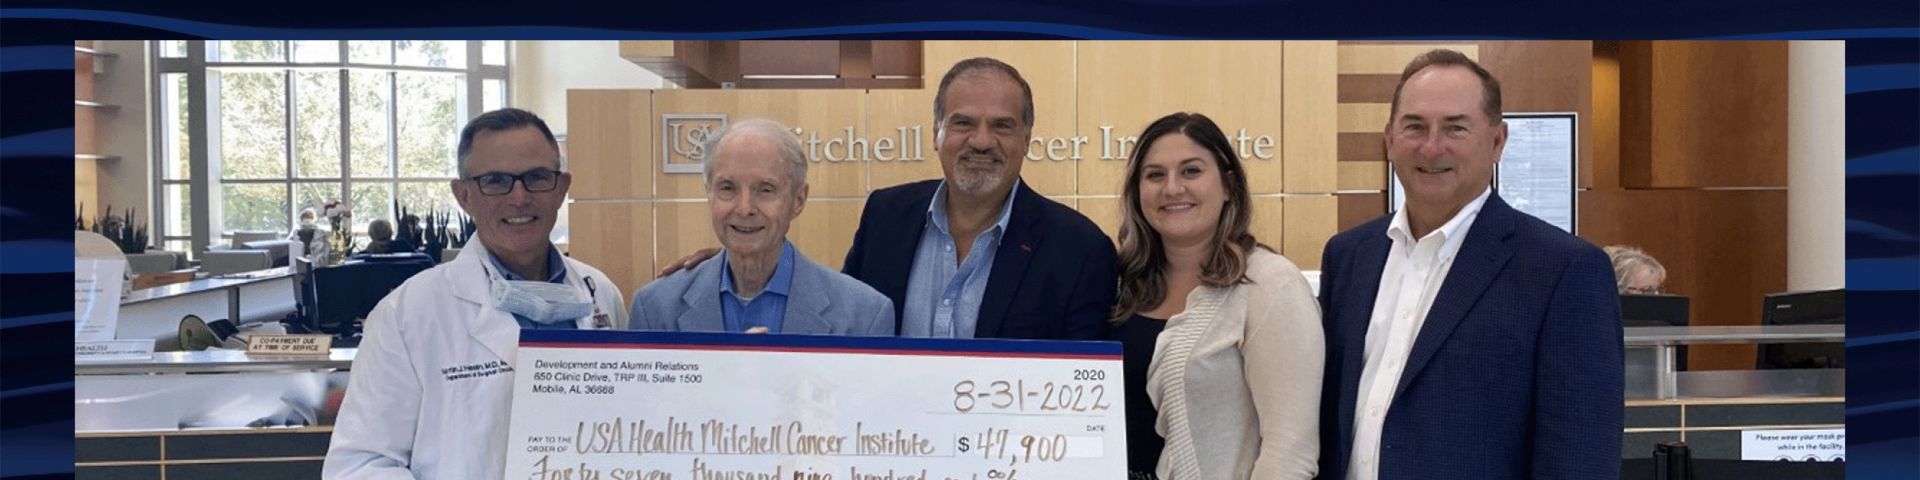 Martin Heslin, M.D., left, director of the USA Health Mitchell Cancer Institute, receives donations totaling $47,900 from Abraham A. Mitchell, second from left; and K.C. Constantine, third from left, president of Manning Inc. Piggly Wiggly. Also pictured are David White, right; and Maya De Andrade.